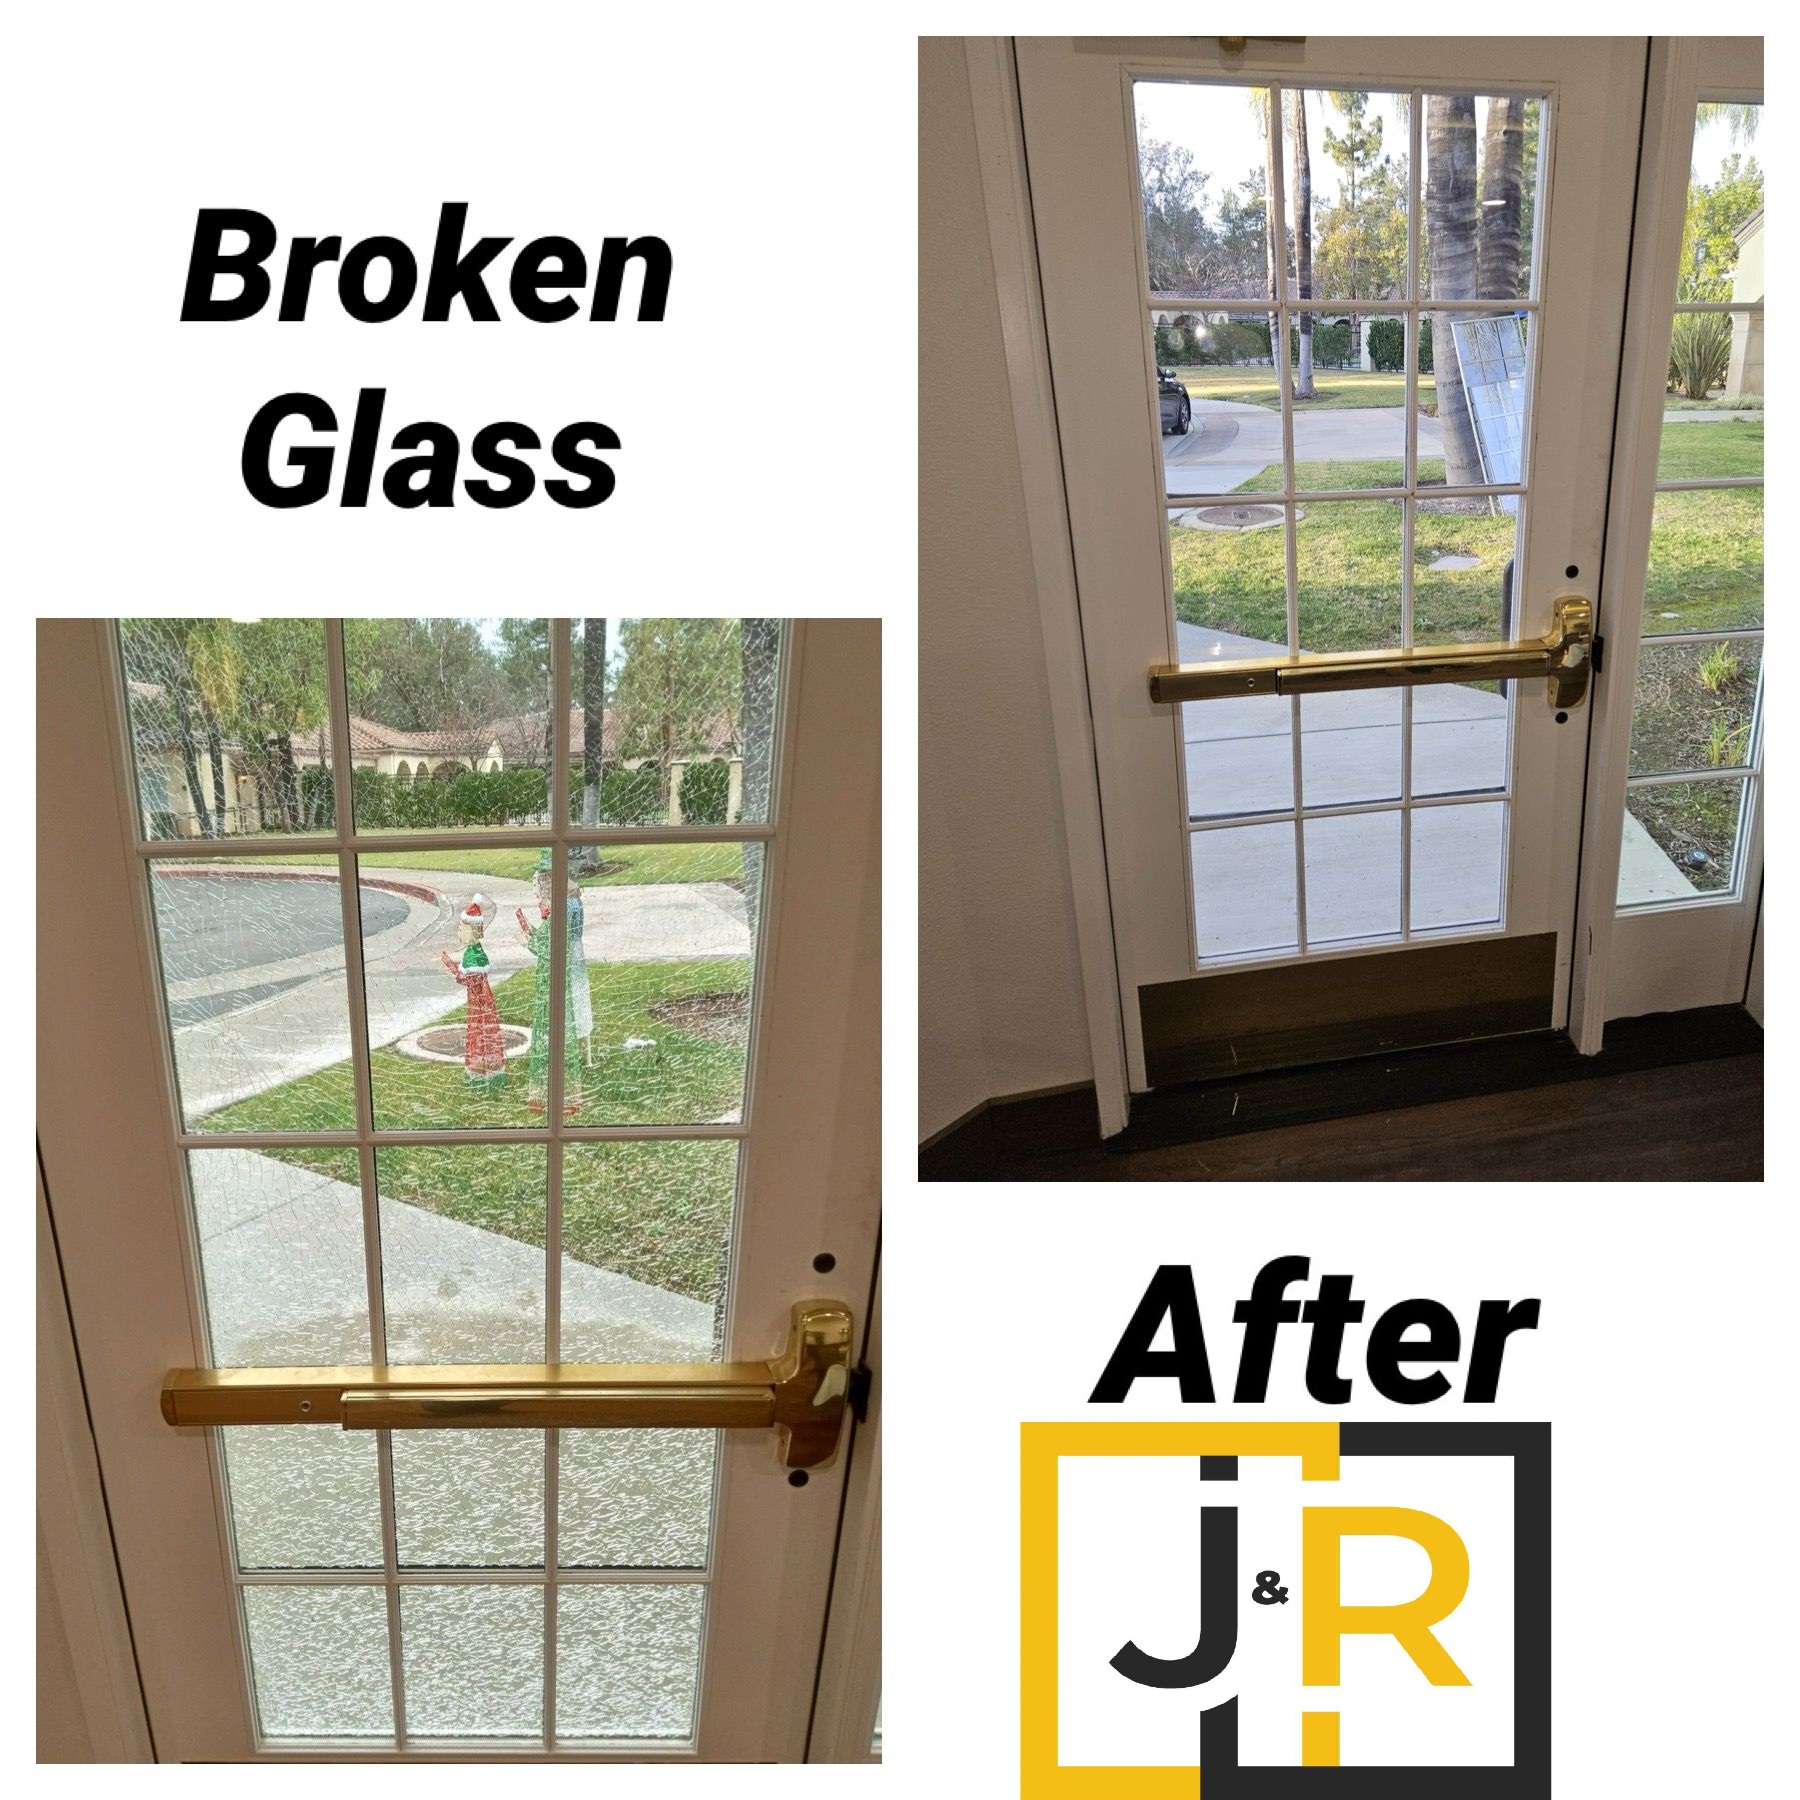 glass replacement service in orange county